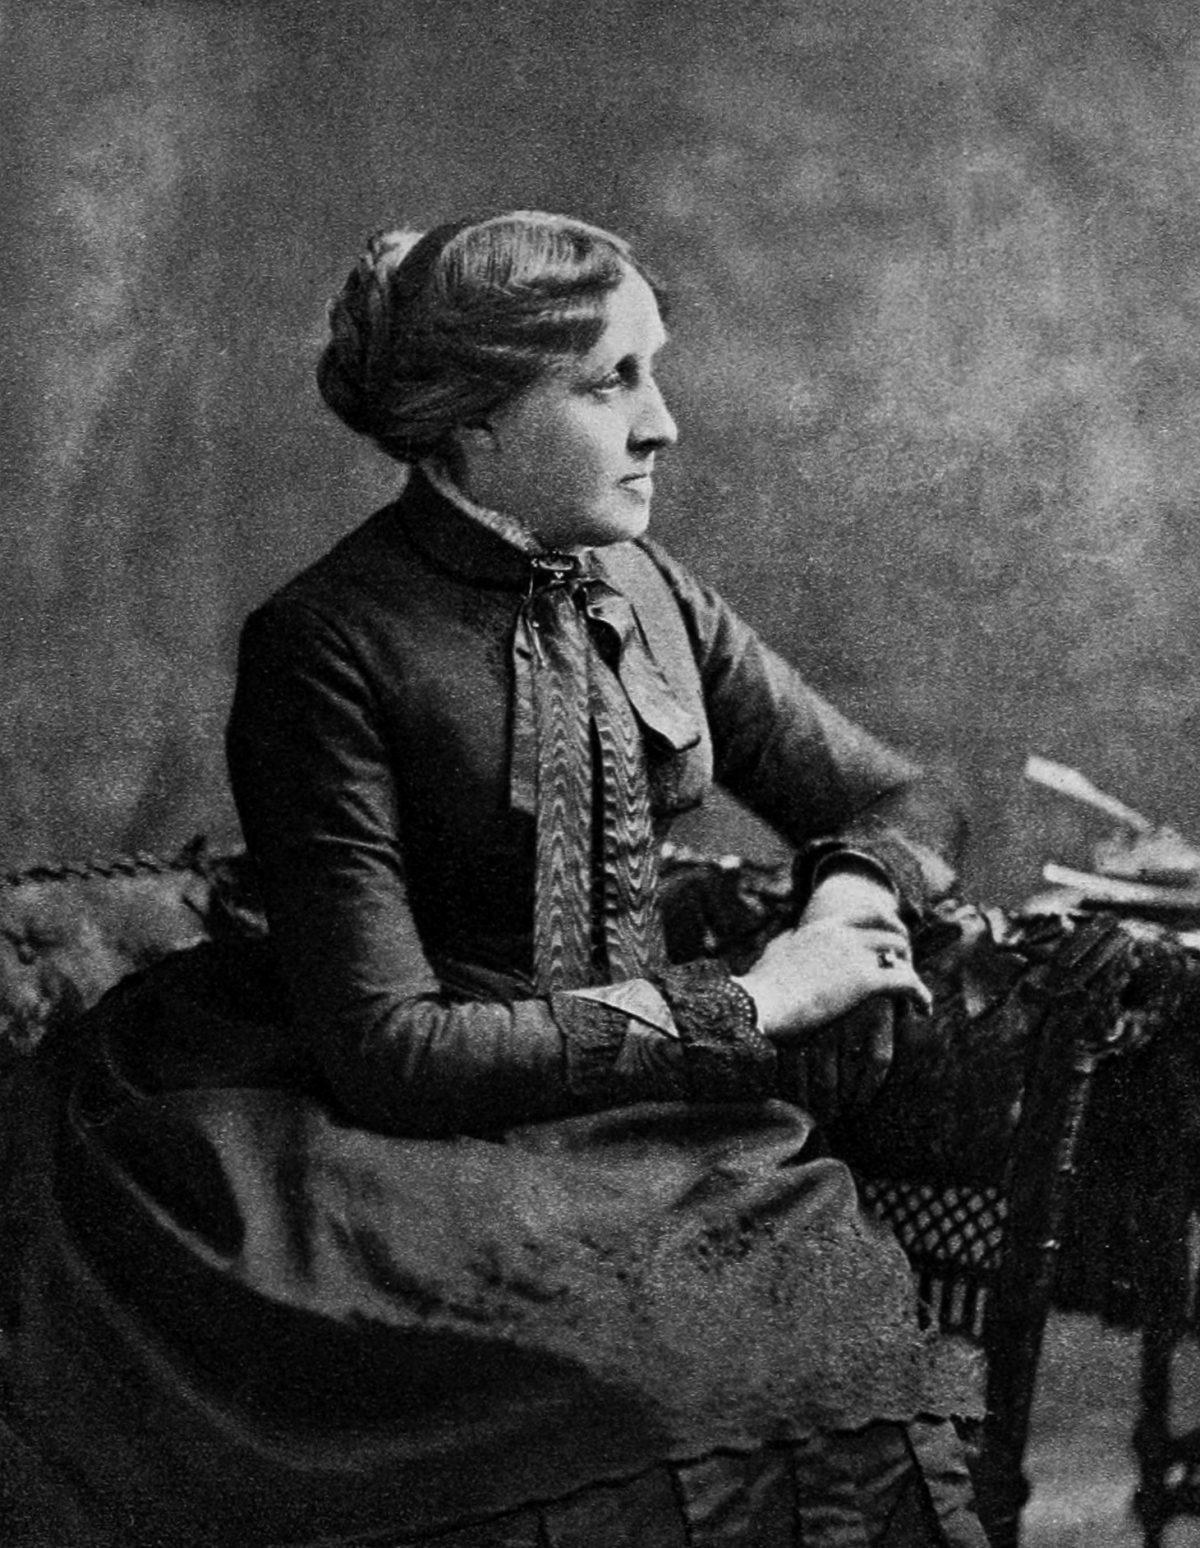 Louisa May Alcott, the author of “Little Women,” wrote one of the most heartrending death scenes in all of English literature. In the story, based on her own life, she describes the death of her dear sister Beth. (Public Domain)